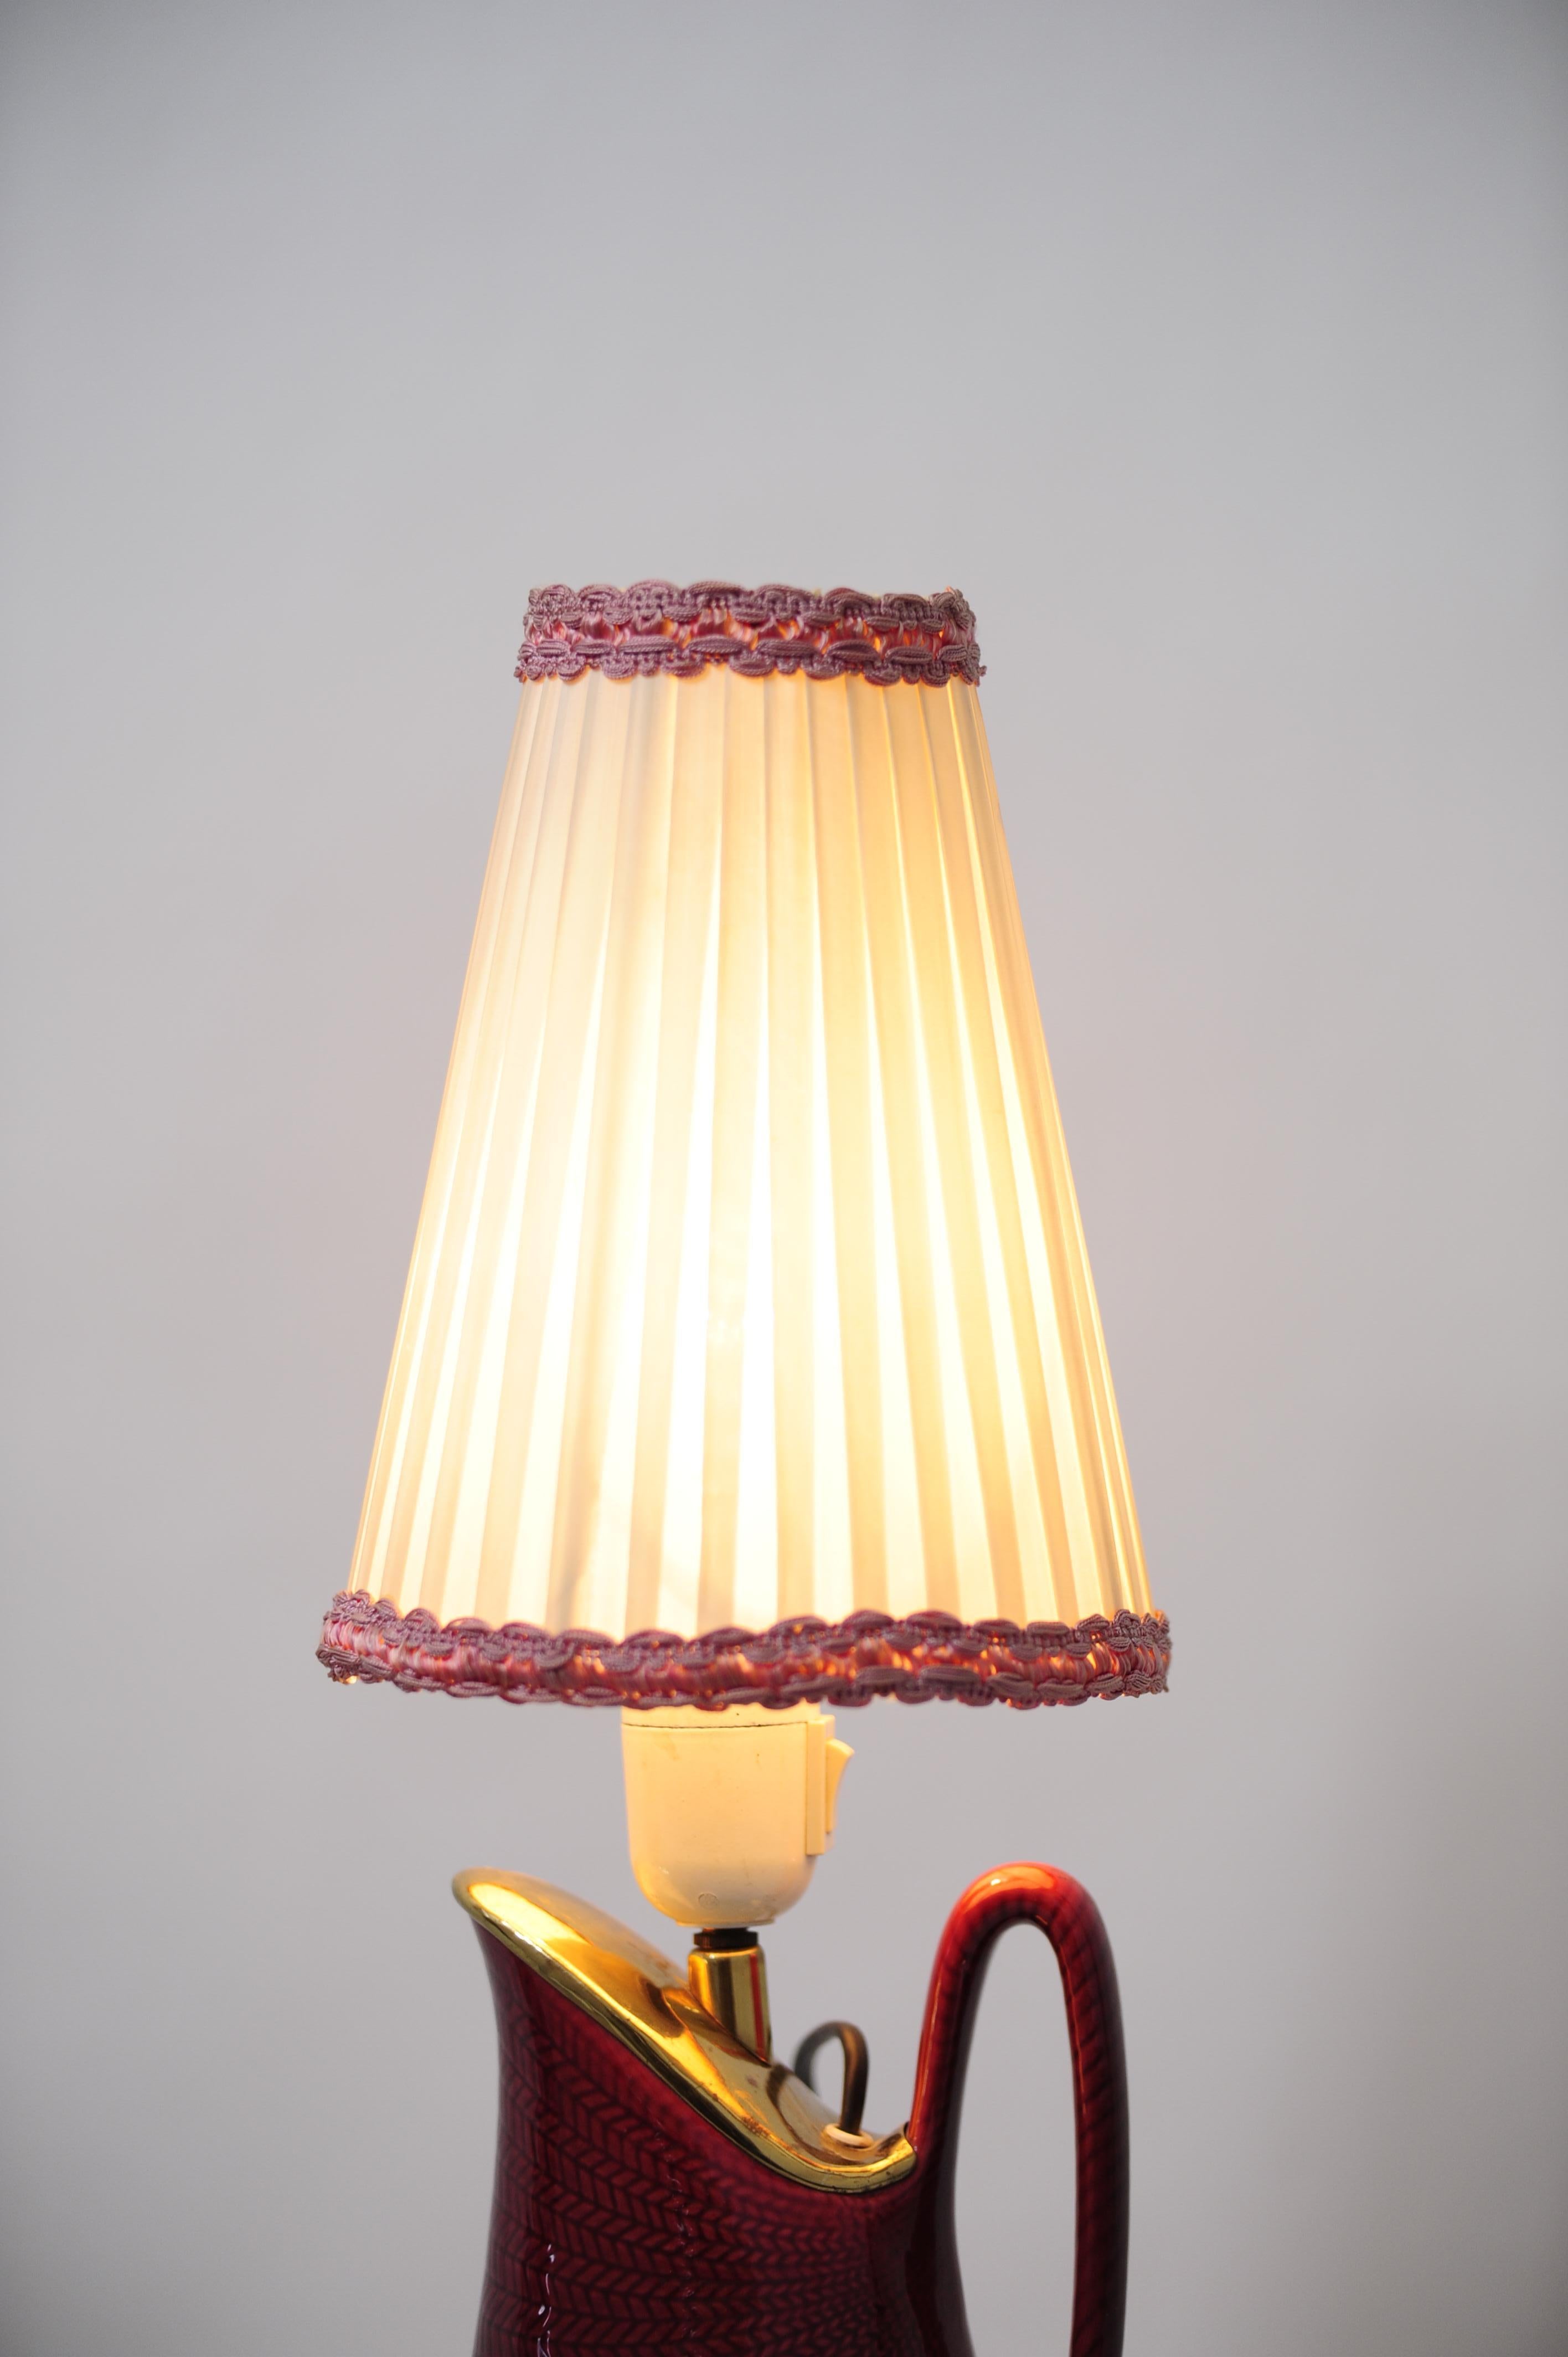 Mid-20th Century Ceramic Table Lamp Made in Sweden, Around 1950s For Sale